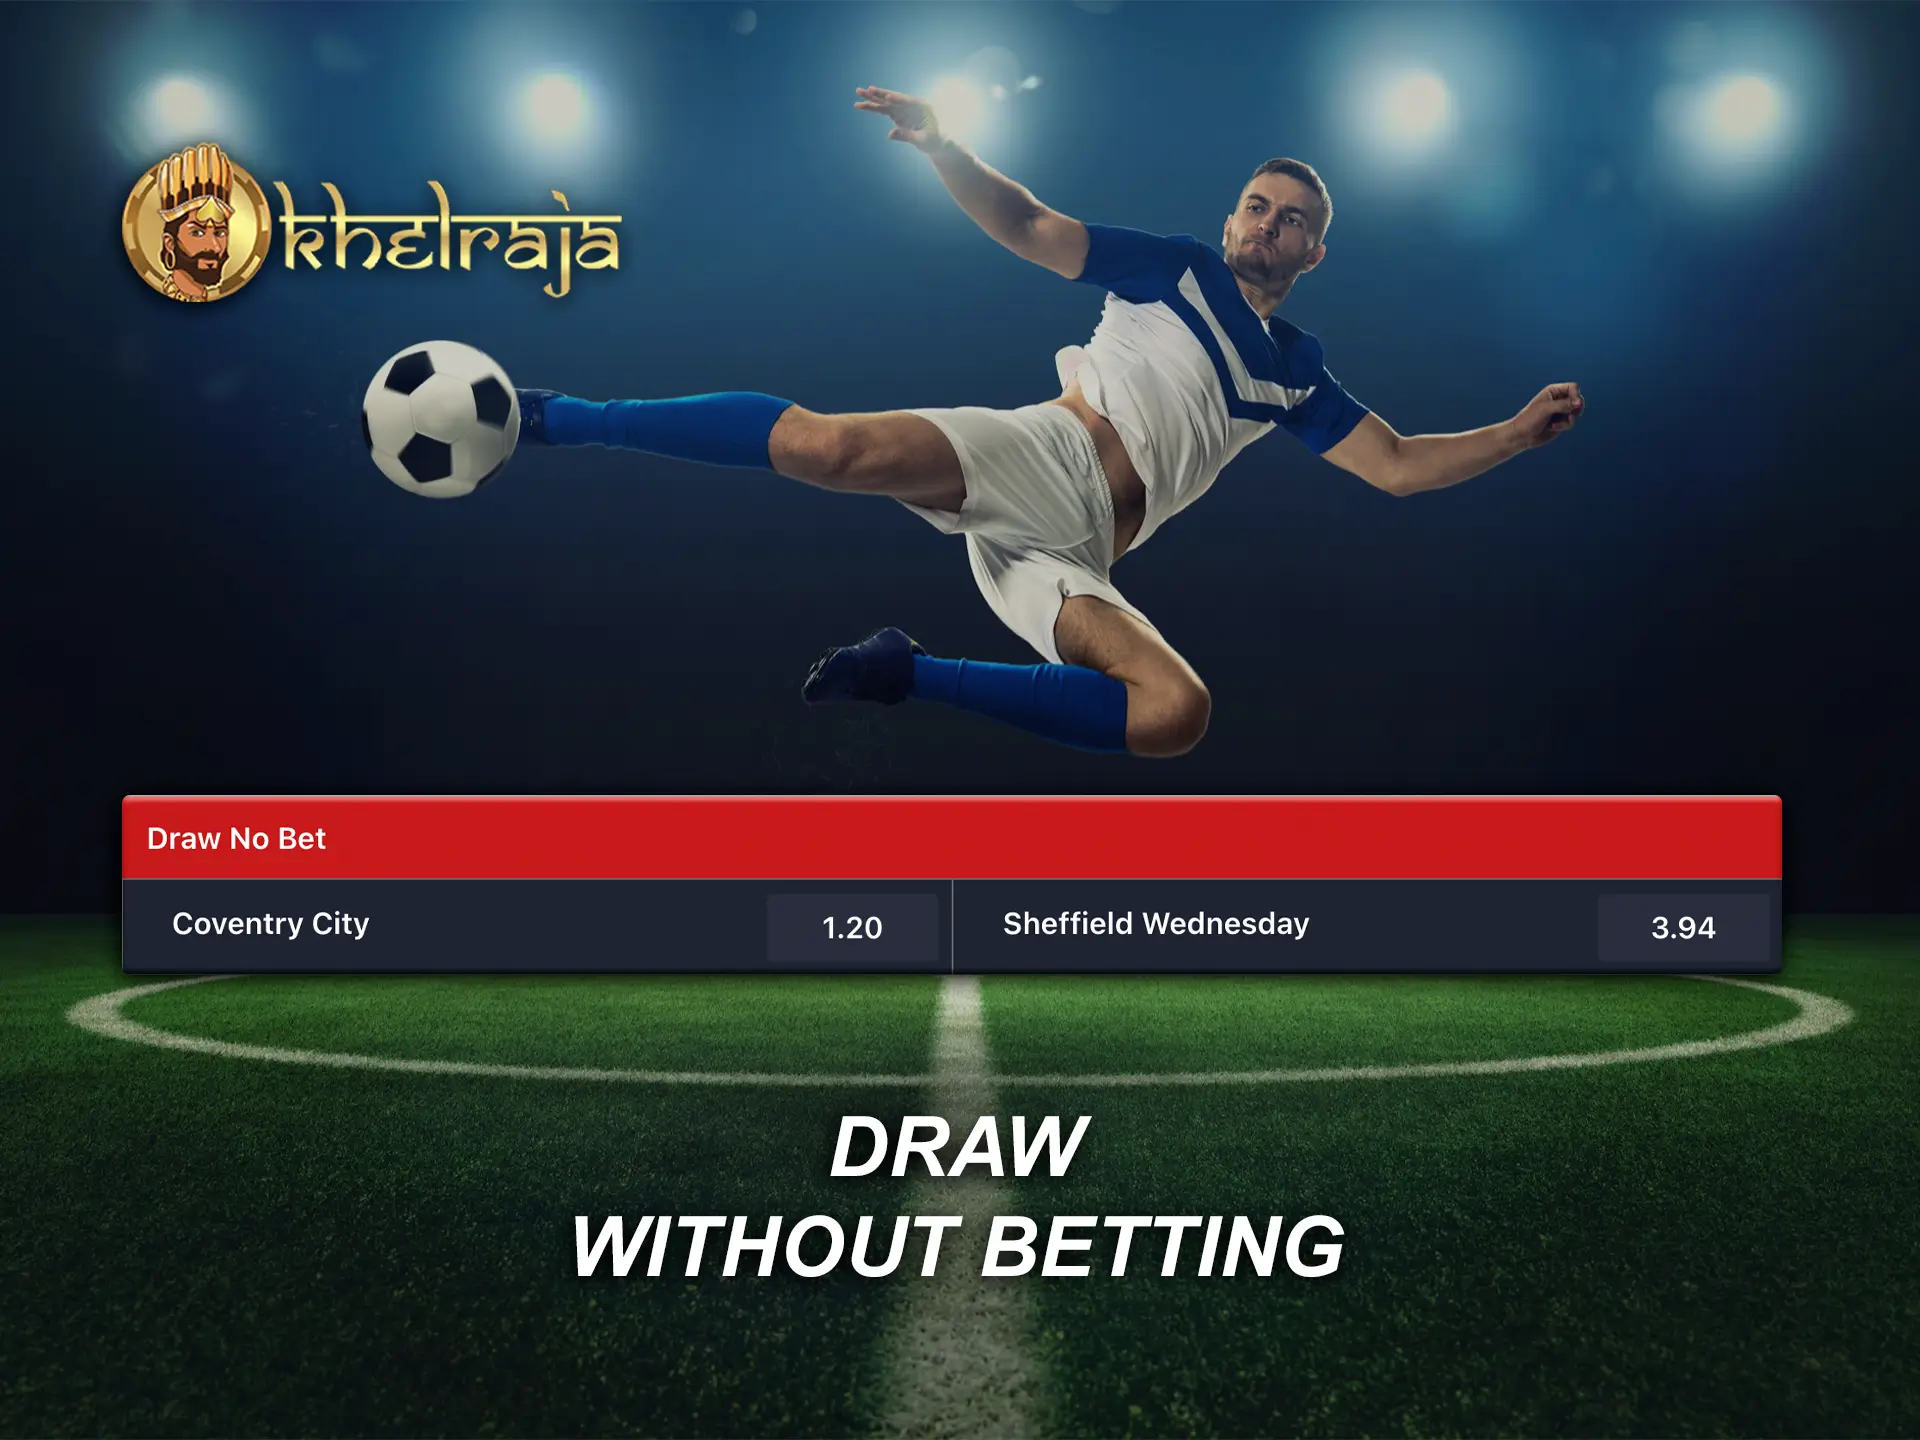 Khelraja offers users who don't like risk a great betting option with favourable odds.